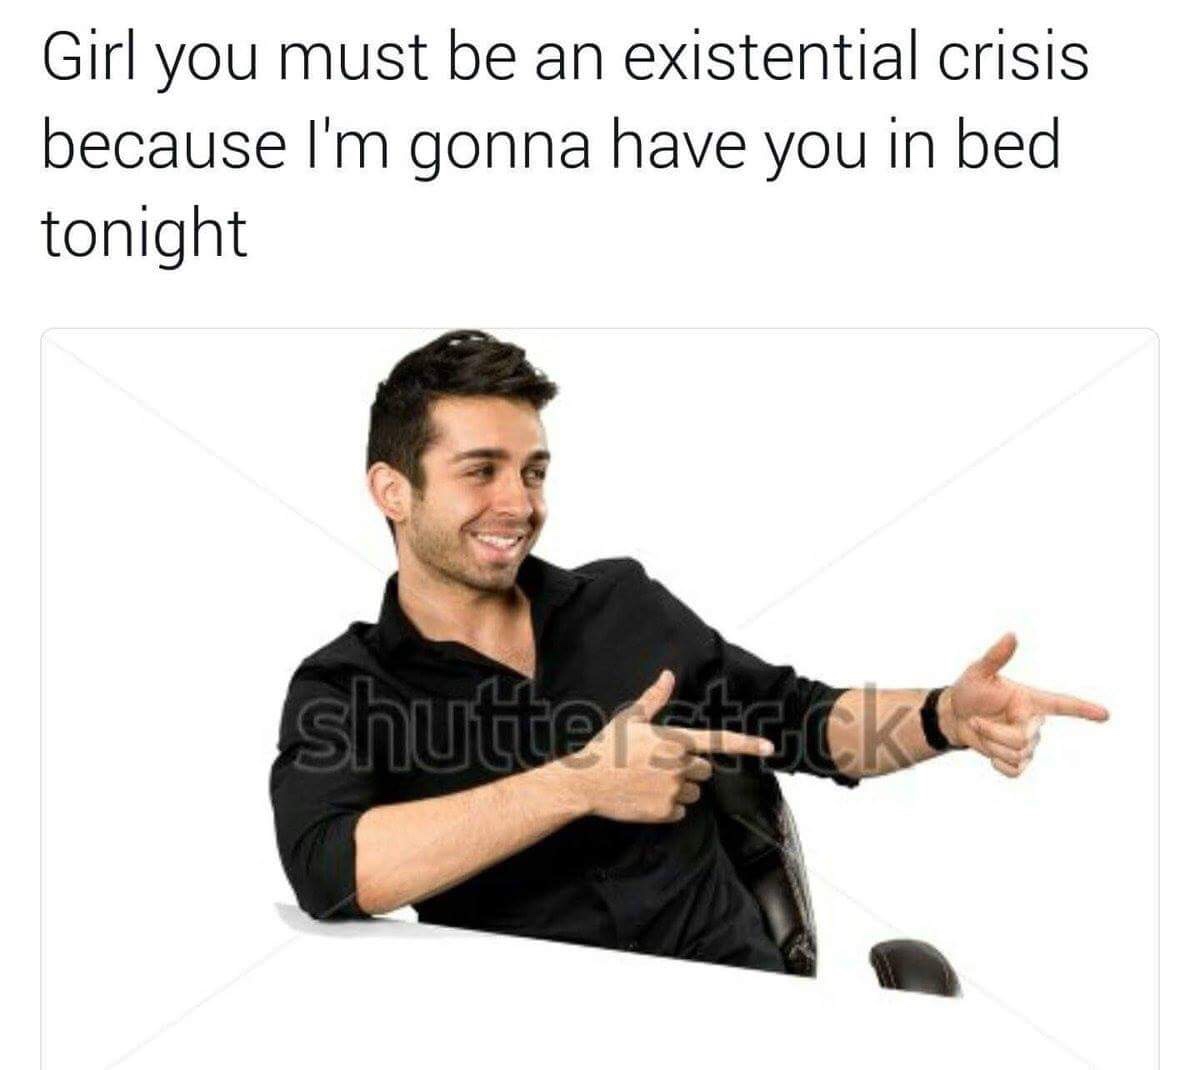 girl you must be an existential crisis - Girl you must be an existential crisis because I'm gonna have you in bed tonight Shuttek